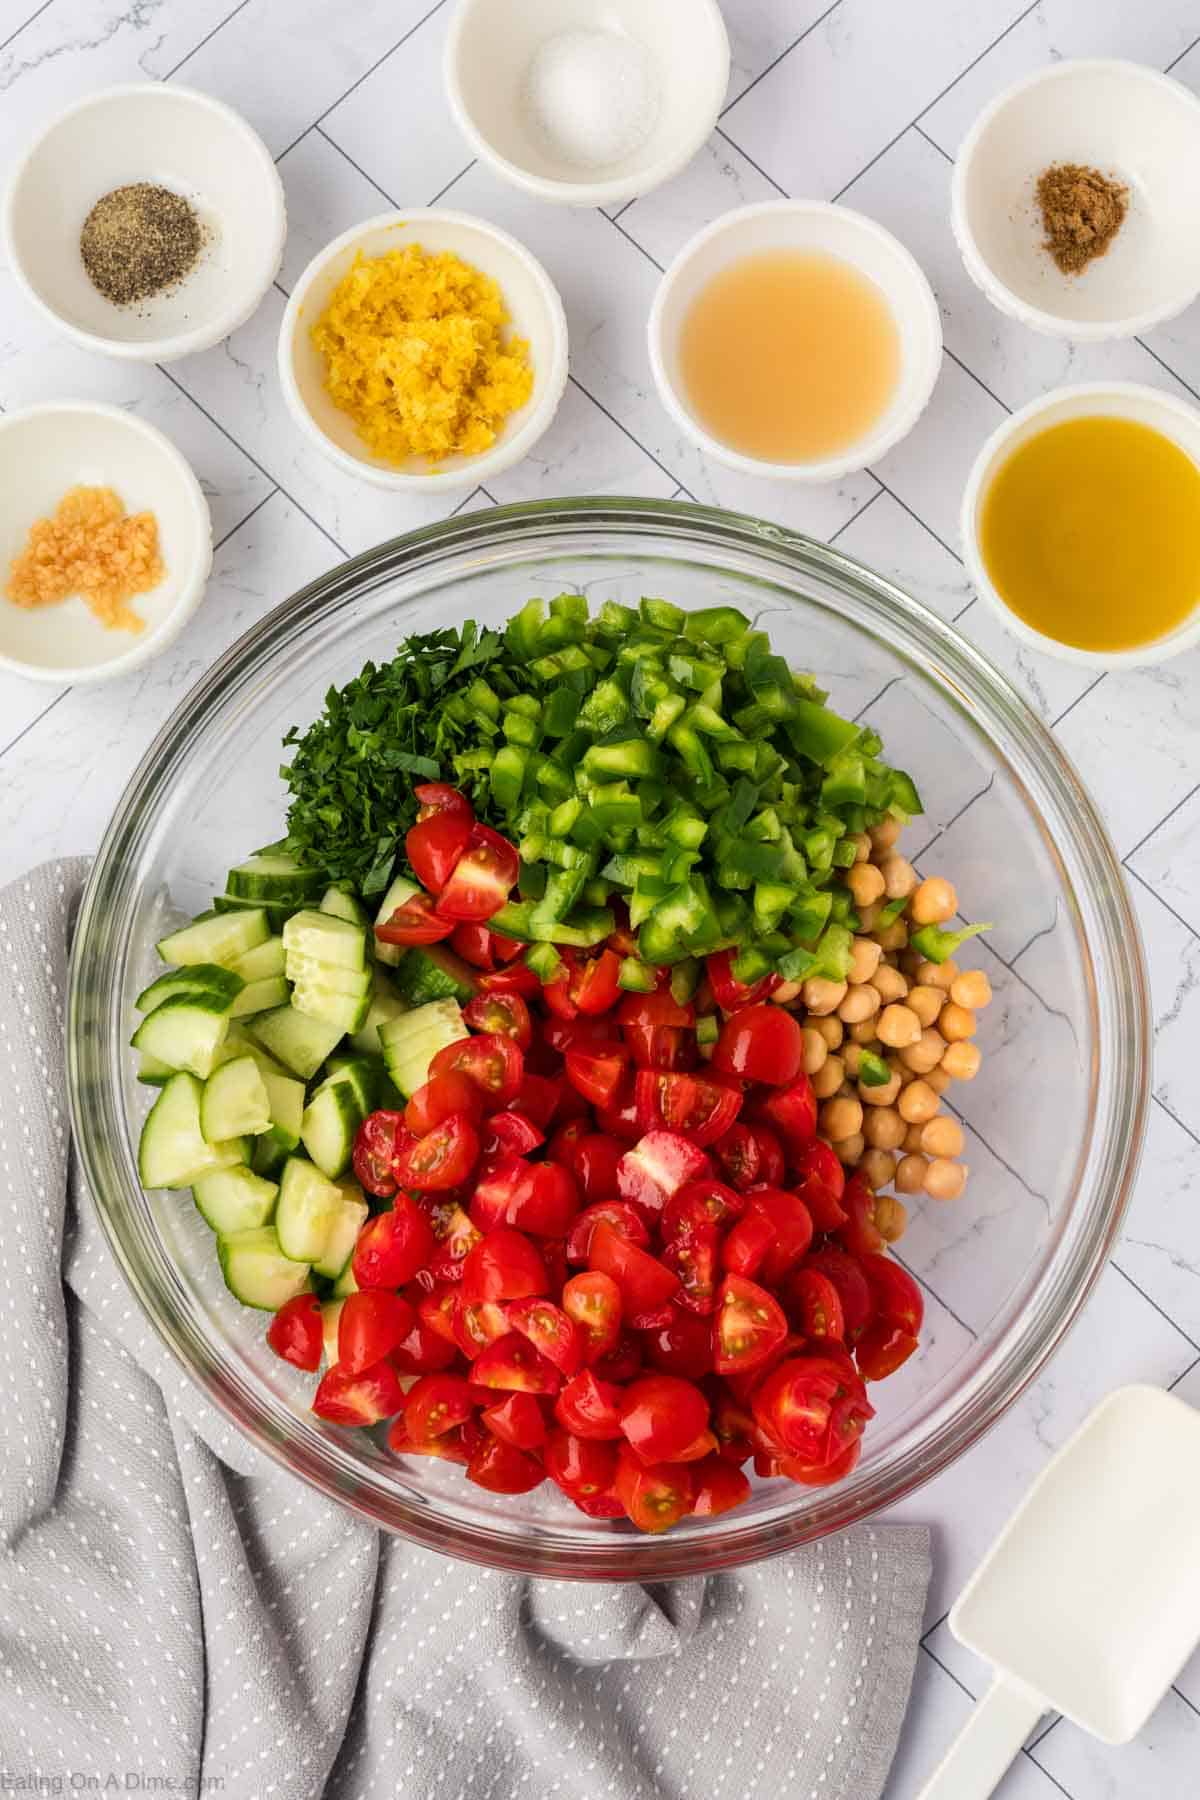 Chopped cherry tomatoes, slice cucumber, bell peppers, chickpea and parsley in a bowl with small bowls of minced garlic, pepper, salt, lemon zest